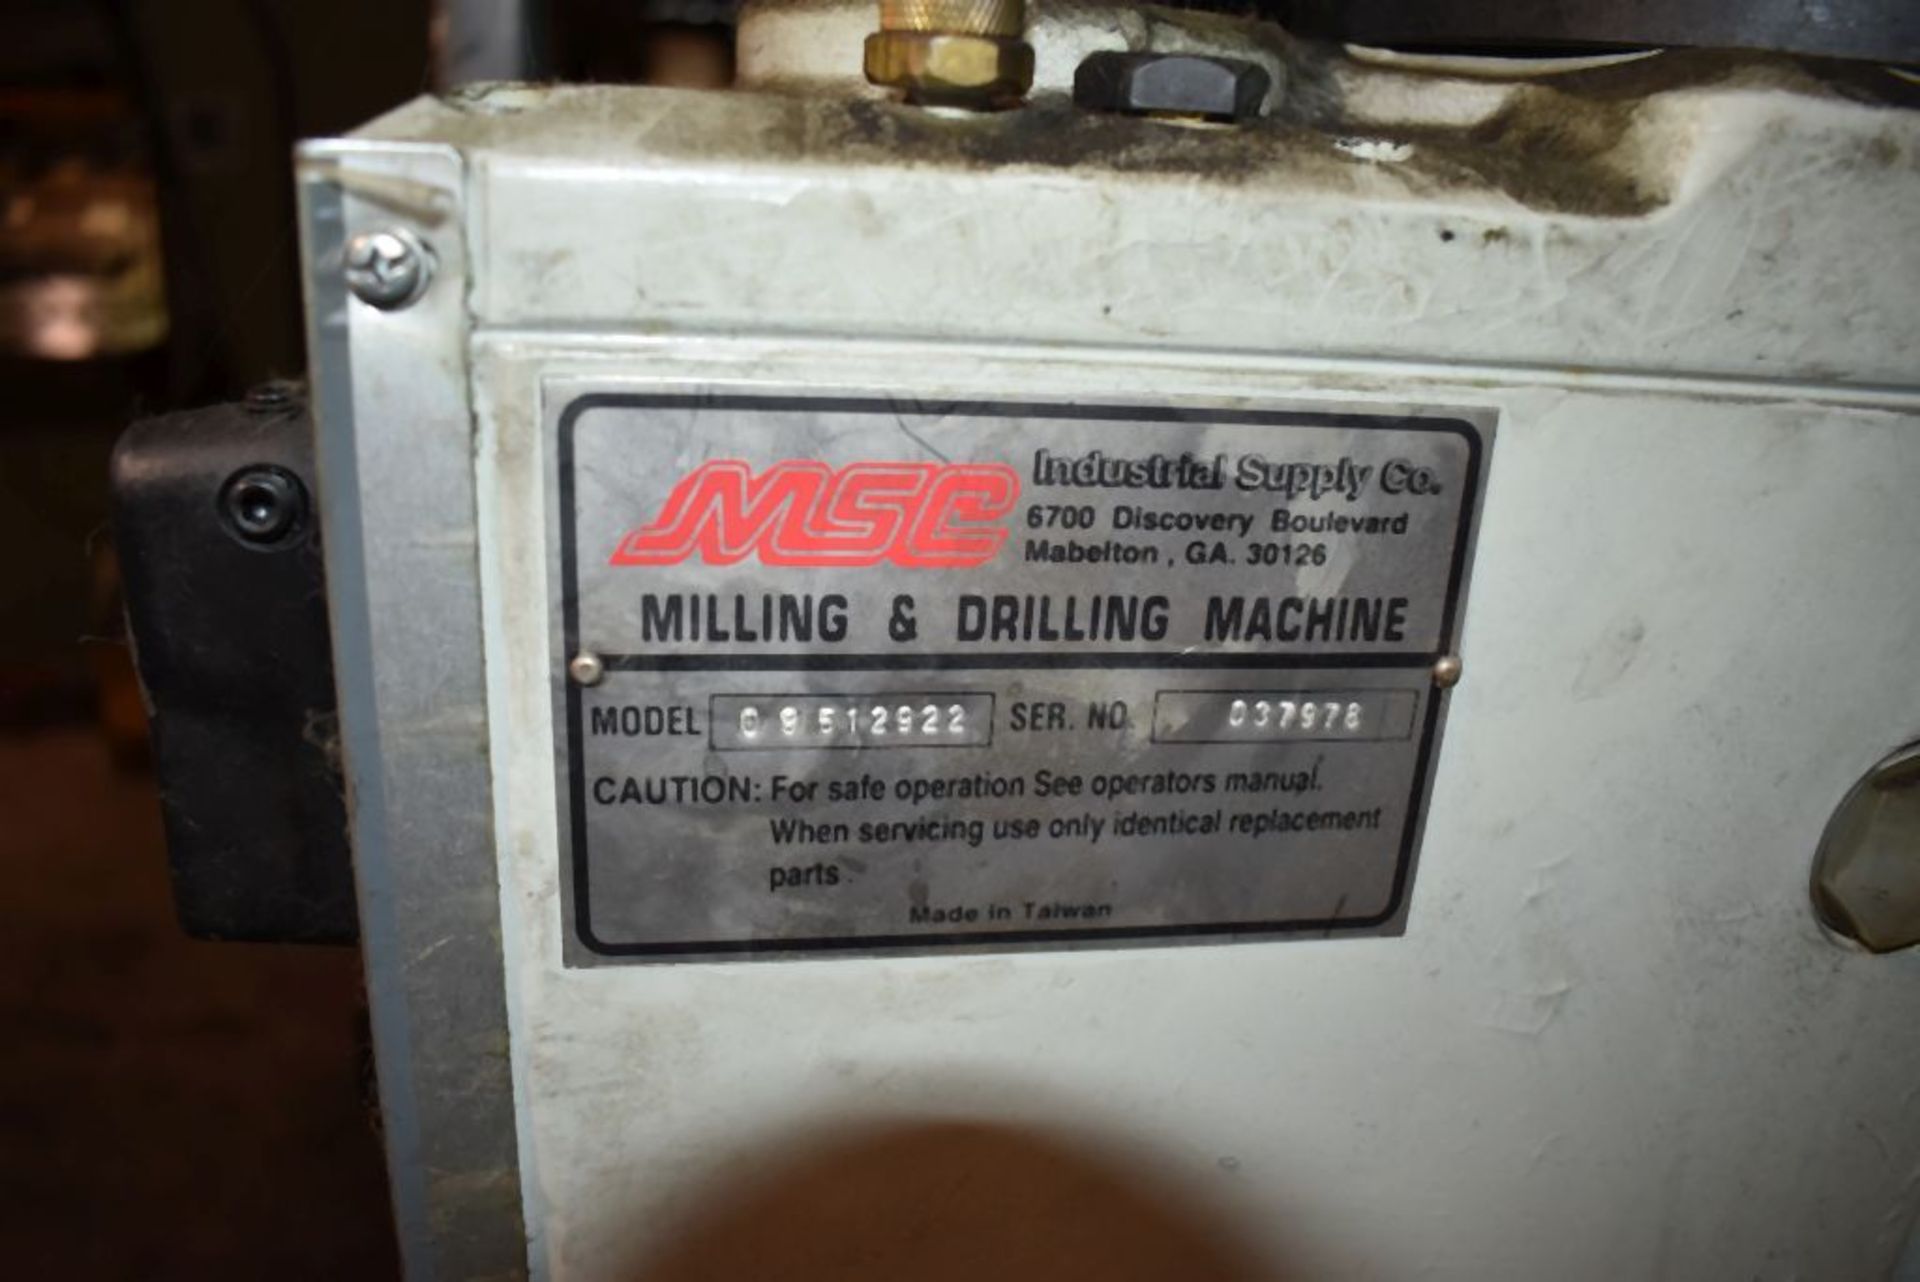 MSC MILLING AND DRILLING MACHINE, MODEL 09512922, S/N: 037978, VARIABLE SPEED HEAD, T-SLOT TABLE, - Image 4 of 4